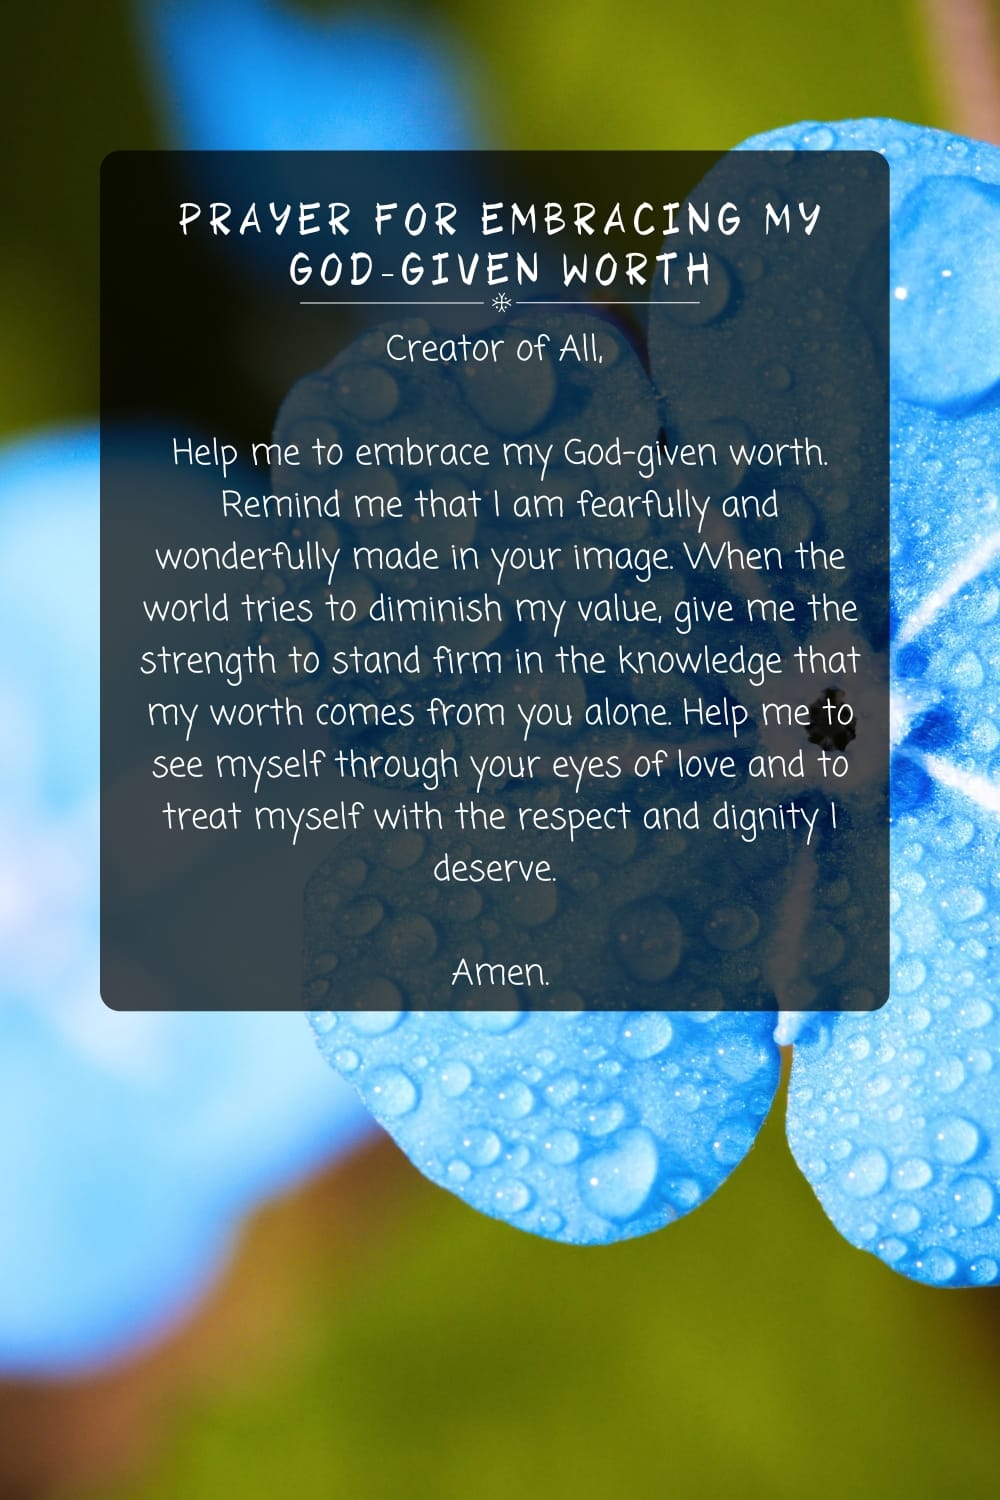 Prayer for Embracing My God-Given Worth